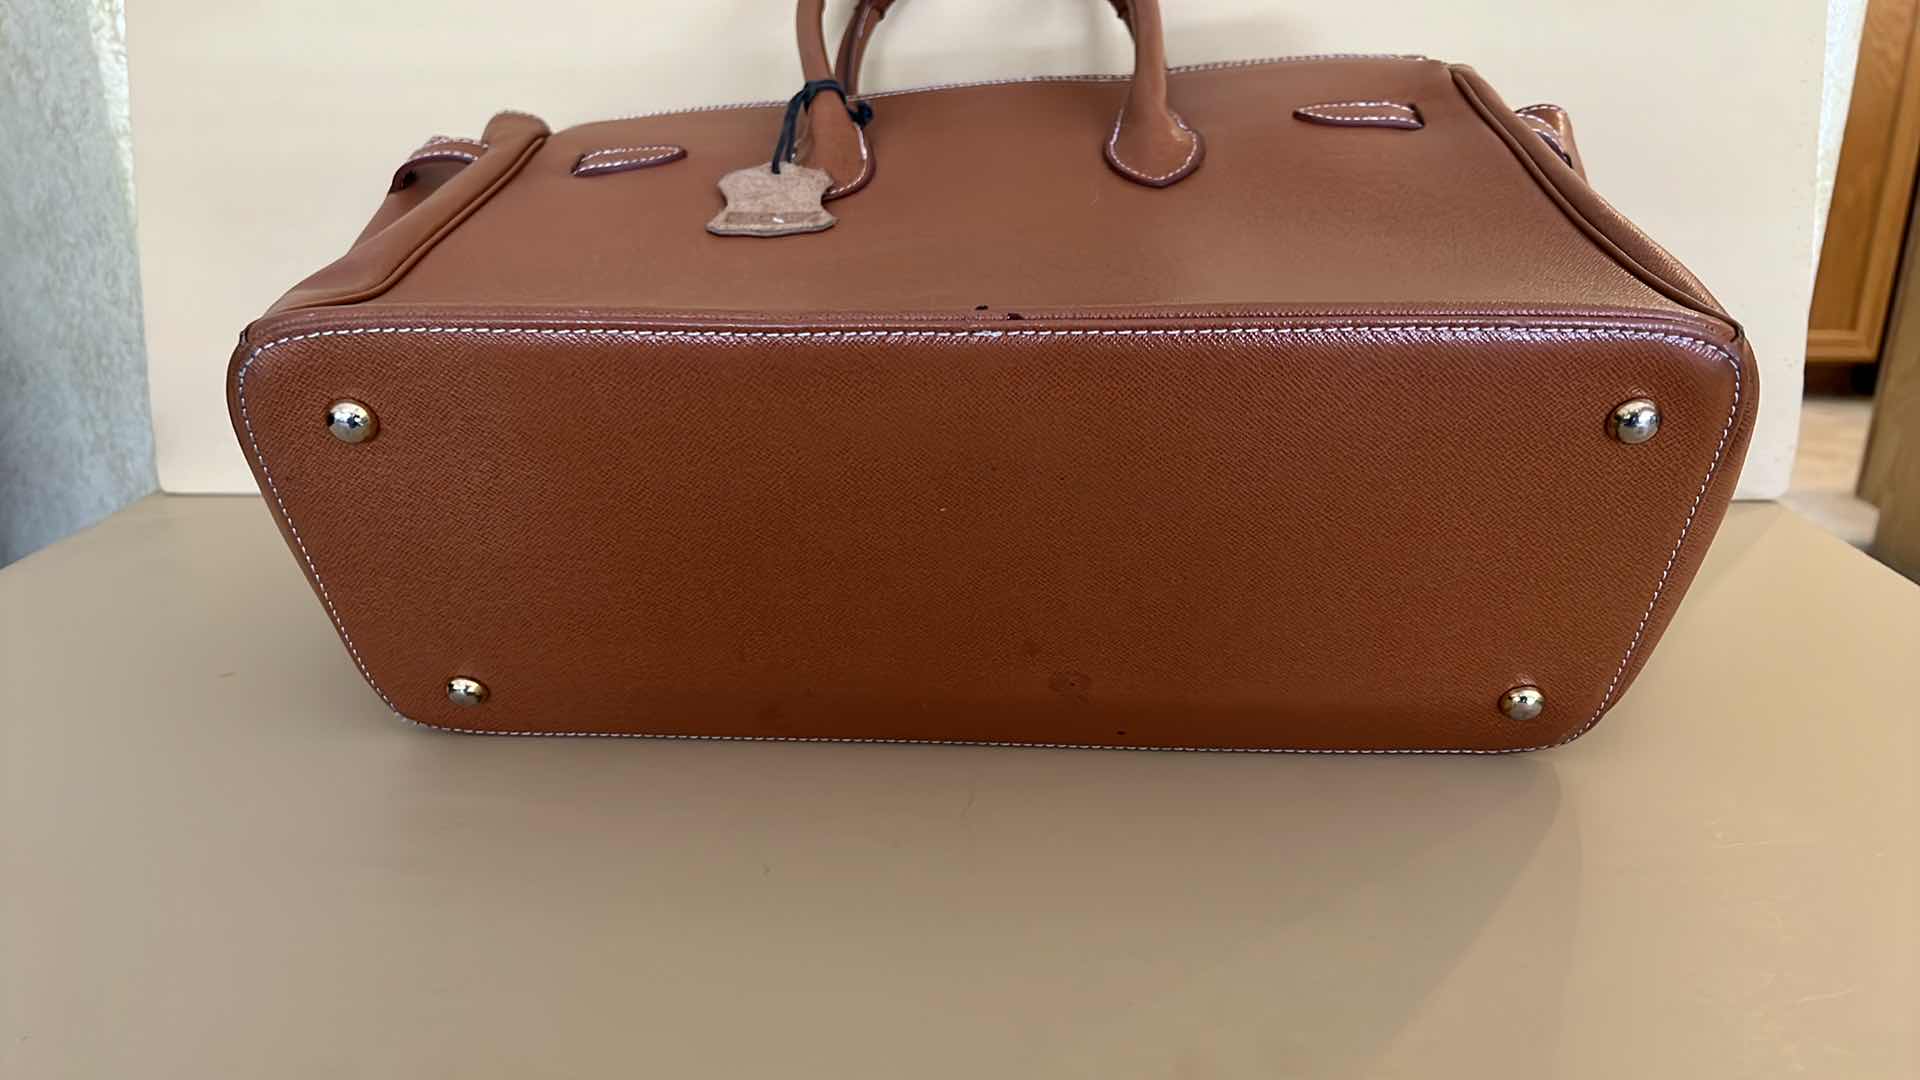 Photo 5 of TAN LEATHER HERMES LABEL HANDBAG (NOT AUTHENTIC)